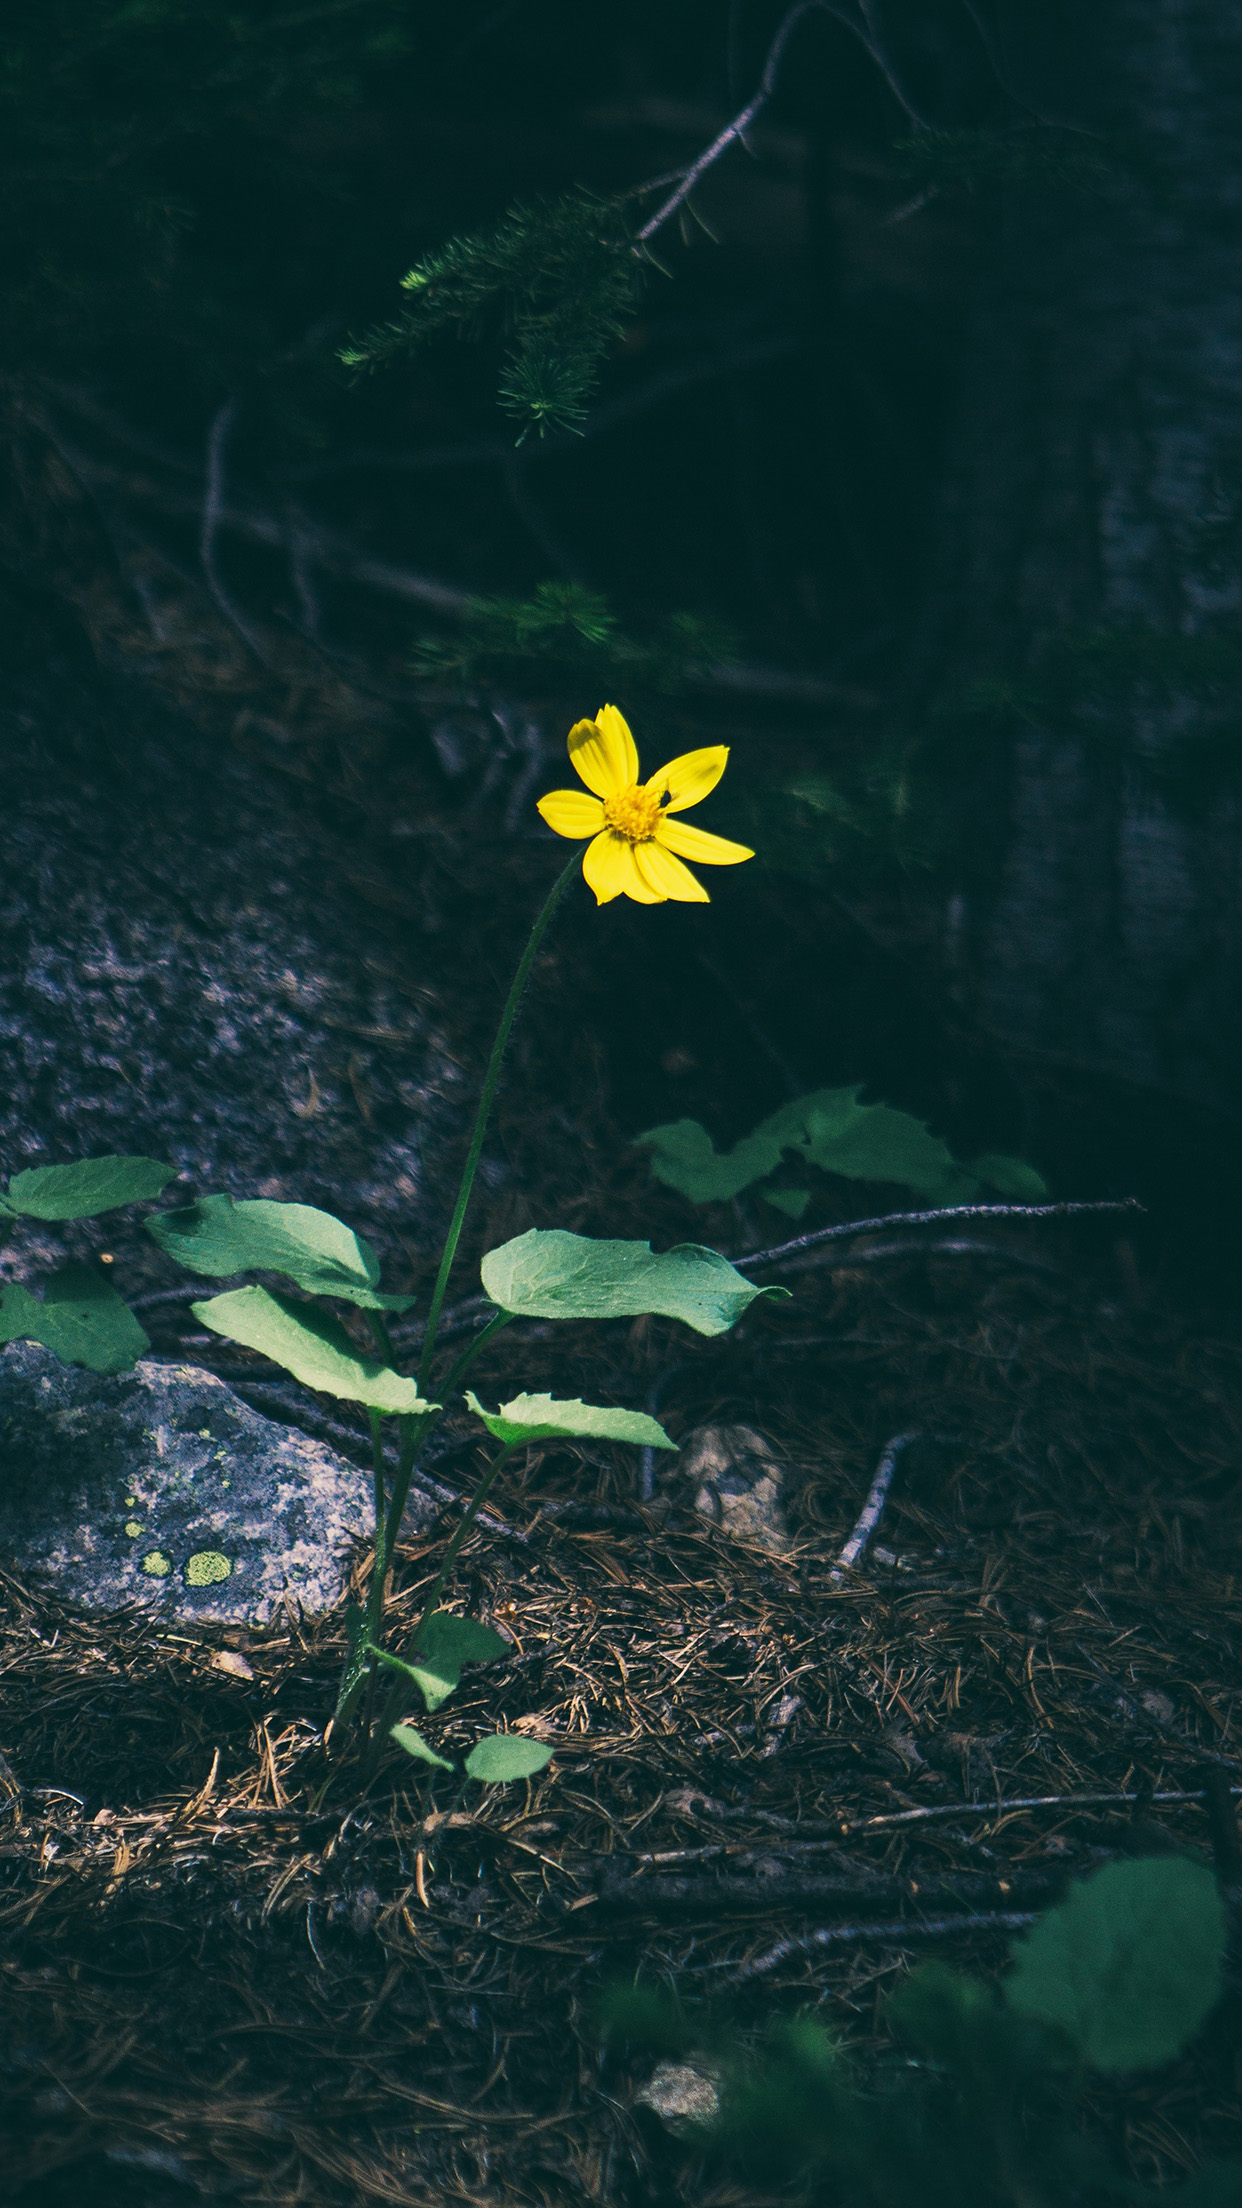 Flower Yellow Forest Wood Lonely Dark Nature Android wallpaper